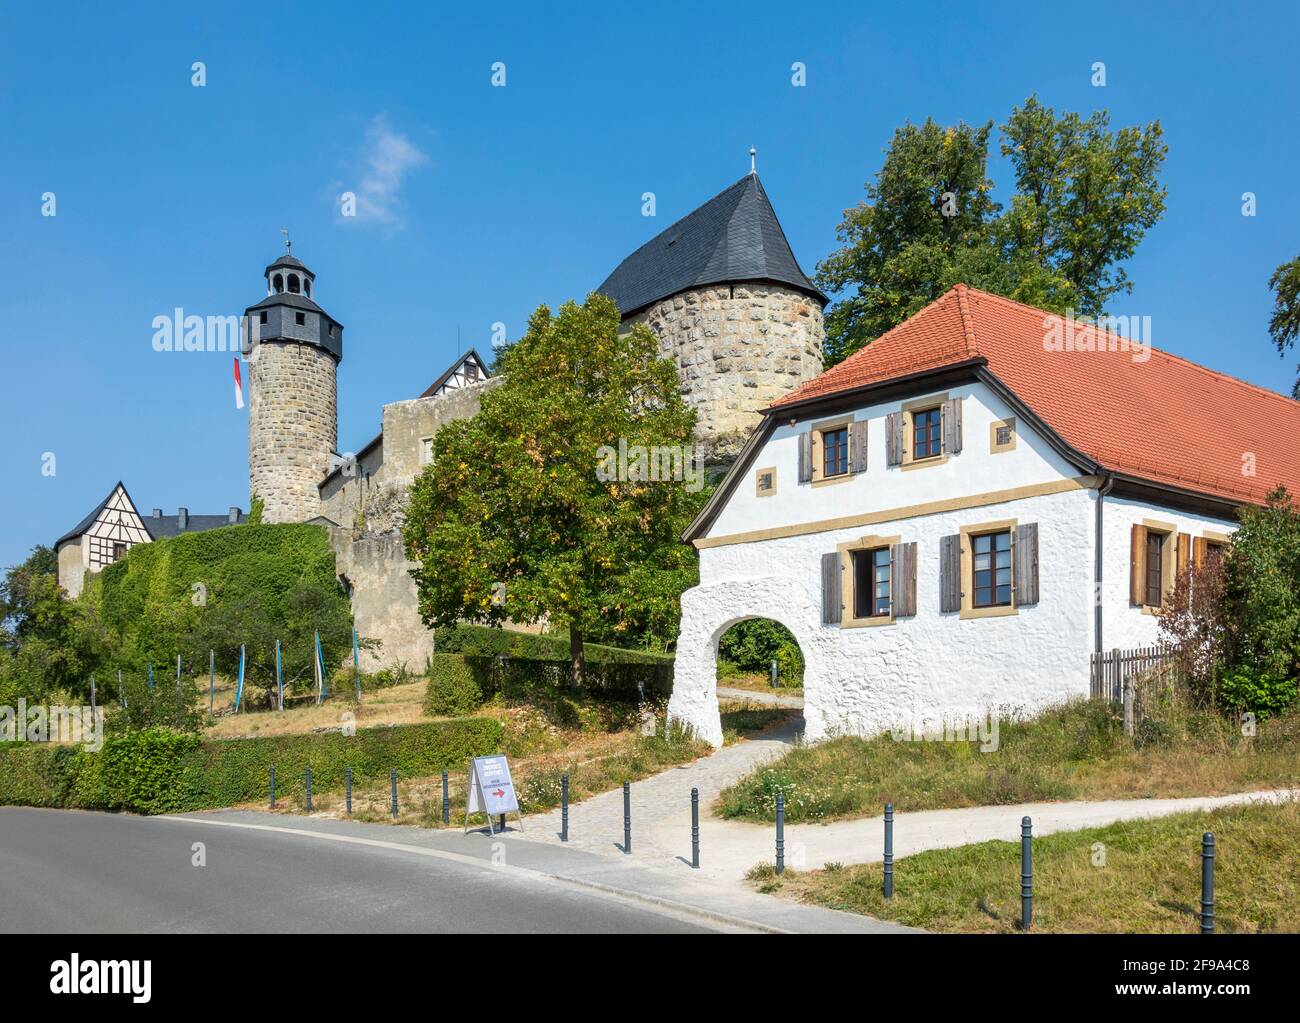 Germany, Bavaria, Wonsees - Sanspareil, Zwernitz Castle with the former caste office now visitor center. Stock Photo